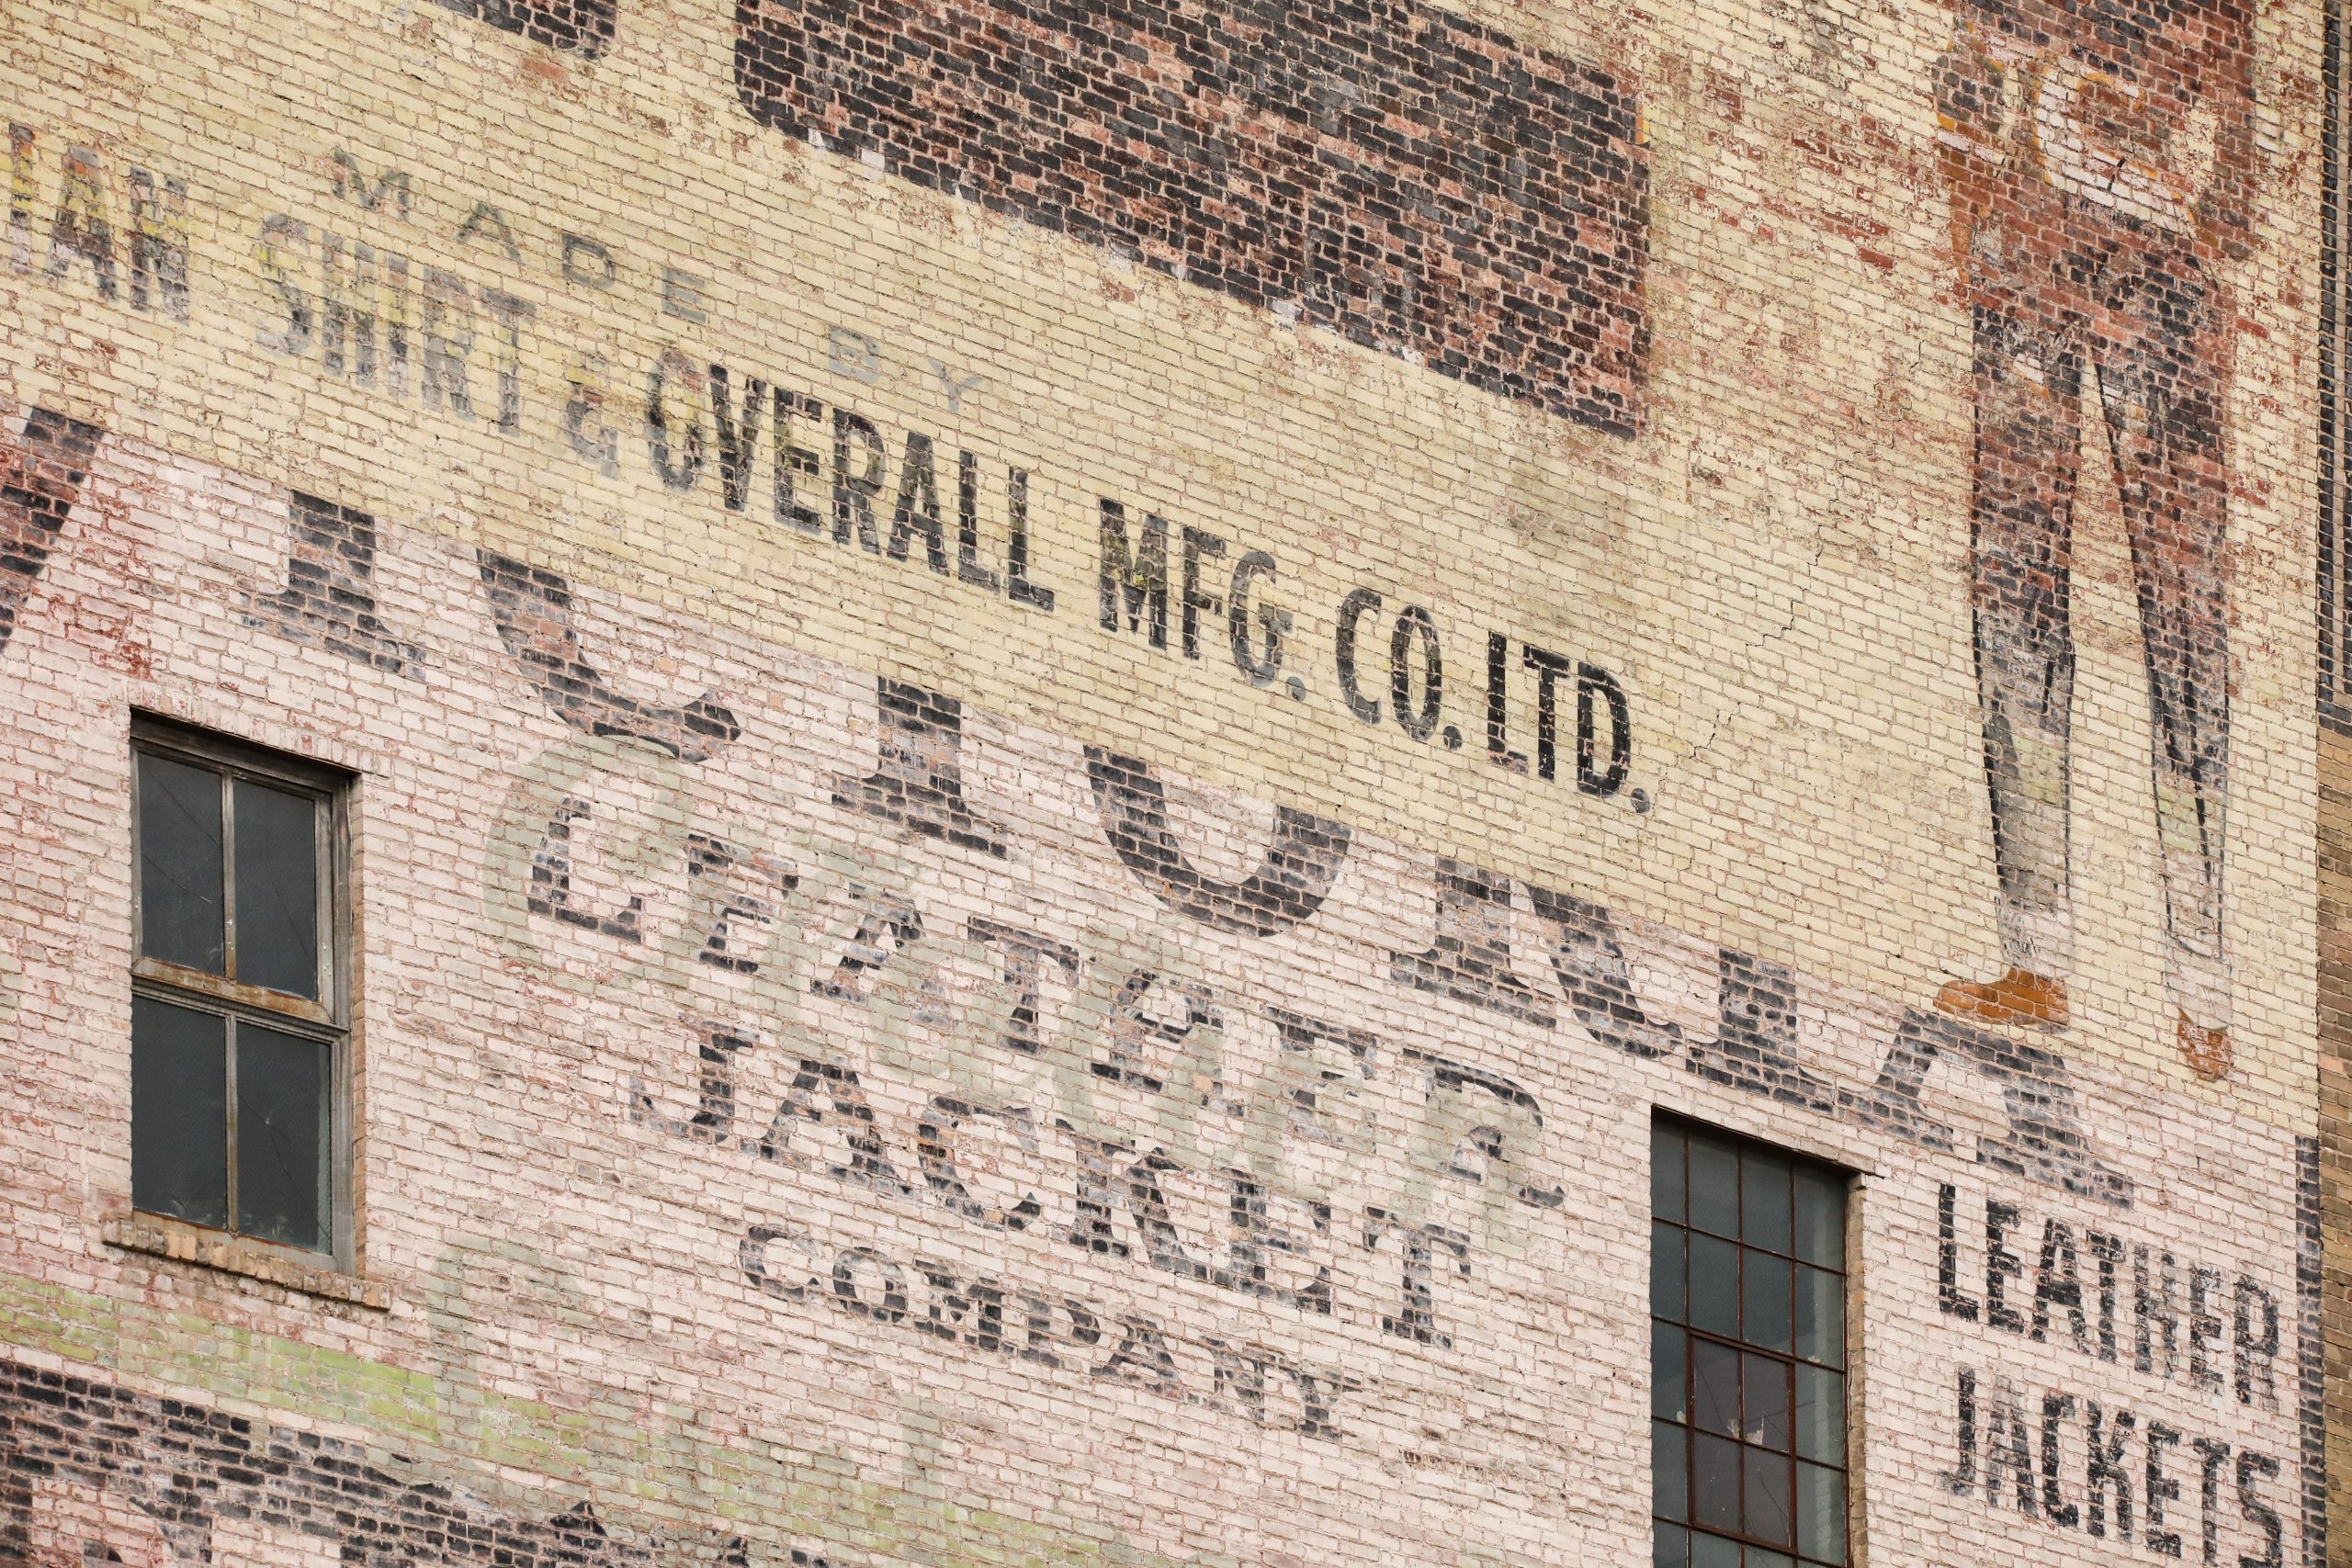 Close-up photo of ghost signs at 296 McDermot Avenue advertising Victoria Leather